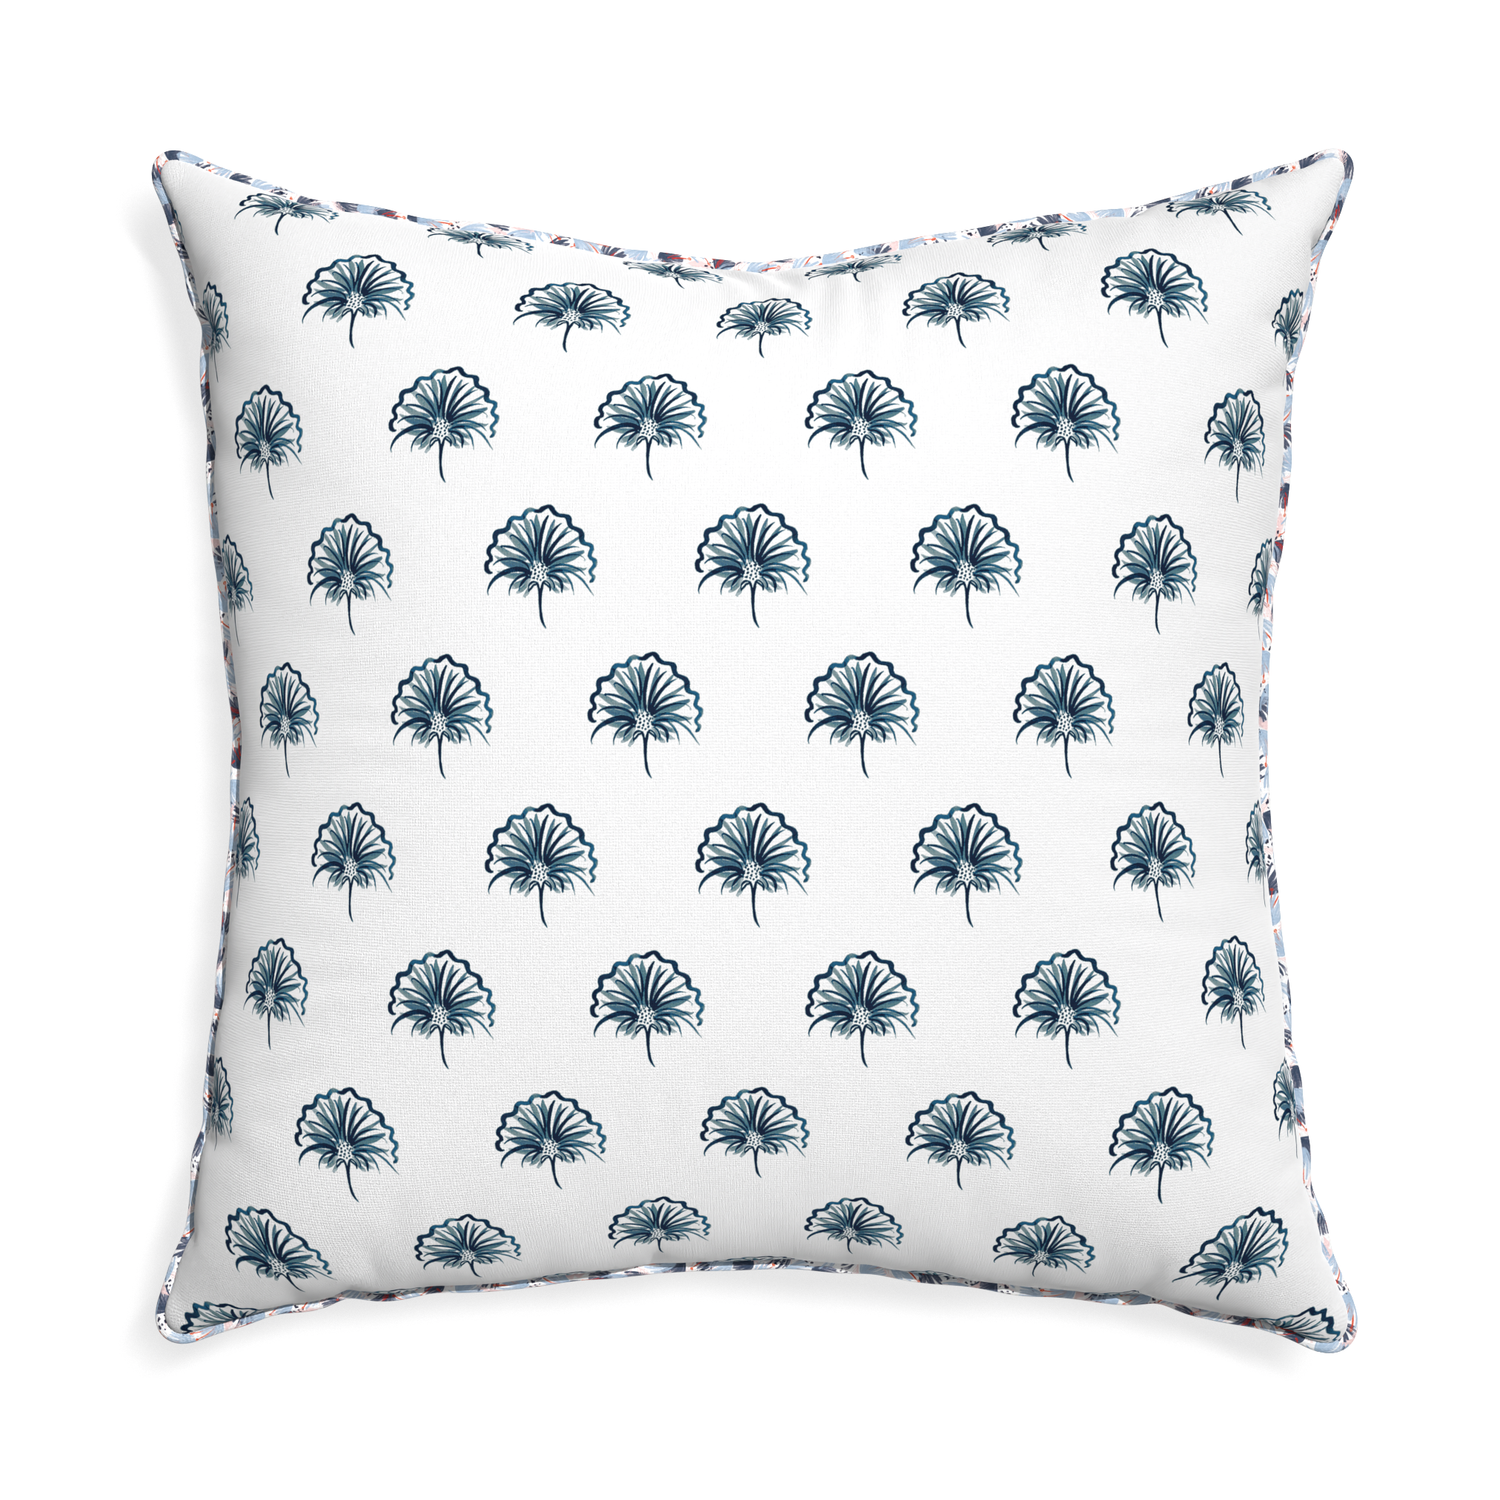 Euro-sham penelope midnight custom pillow with e piping on white background